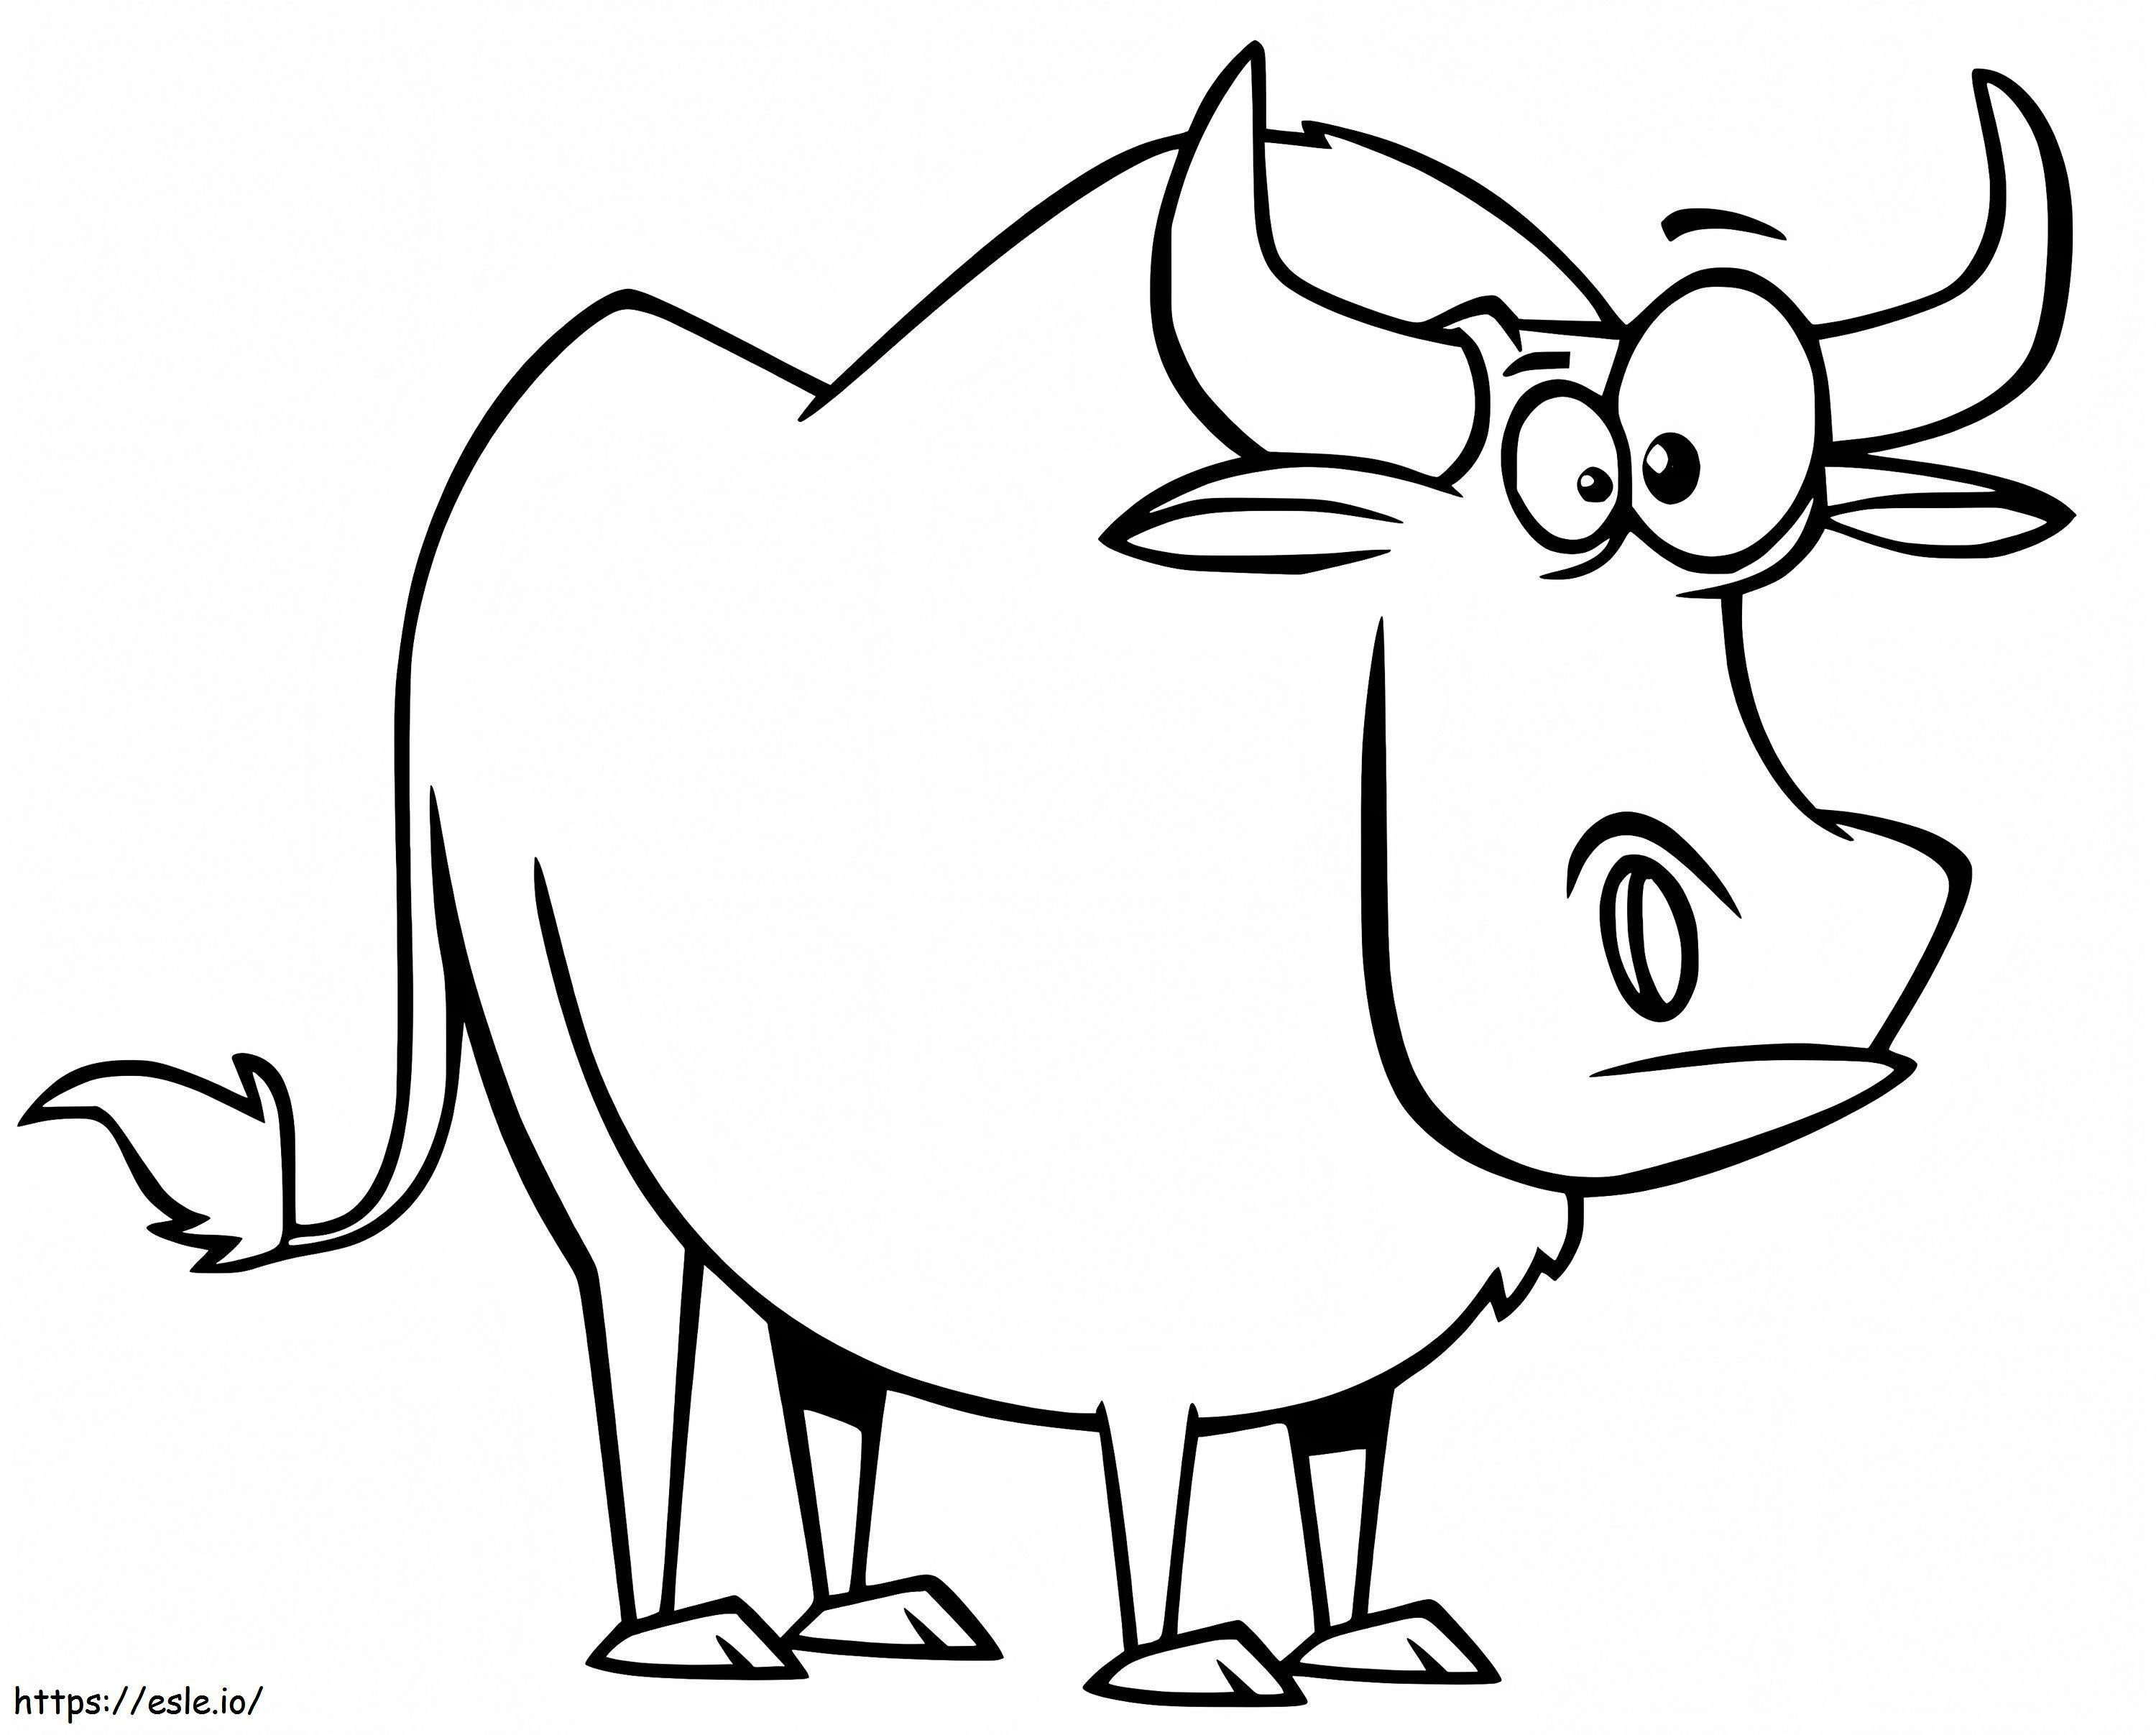 Animated Ox coloring page